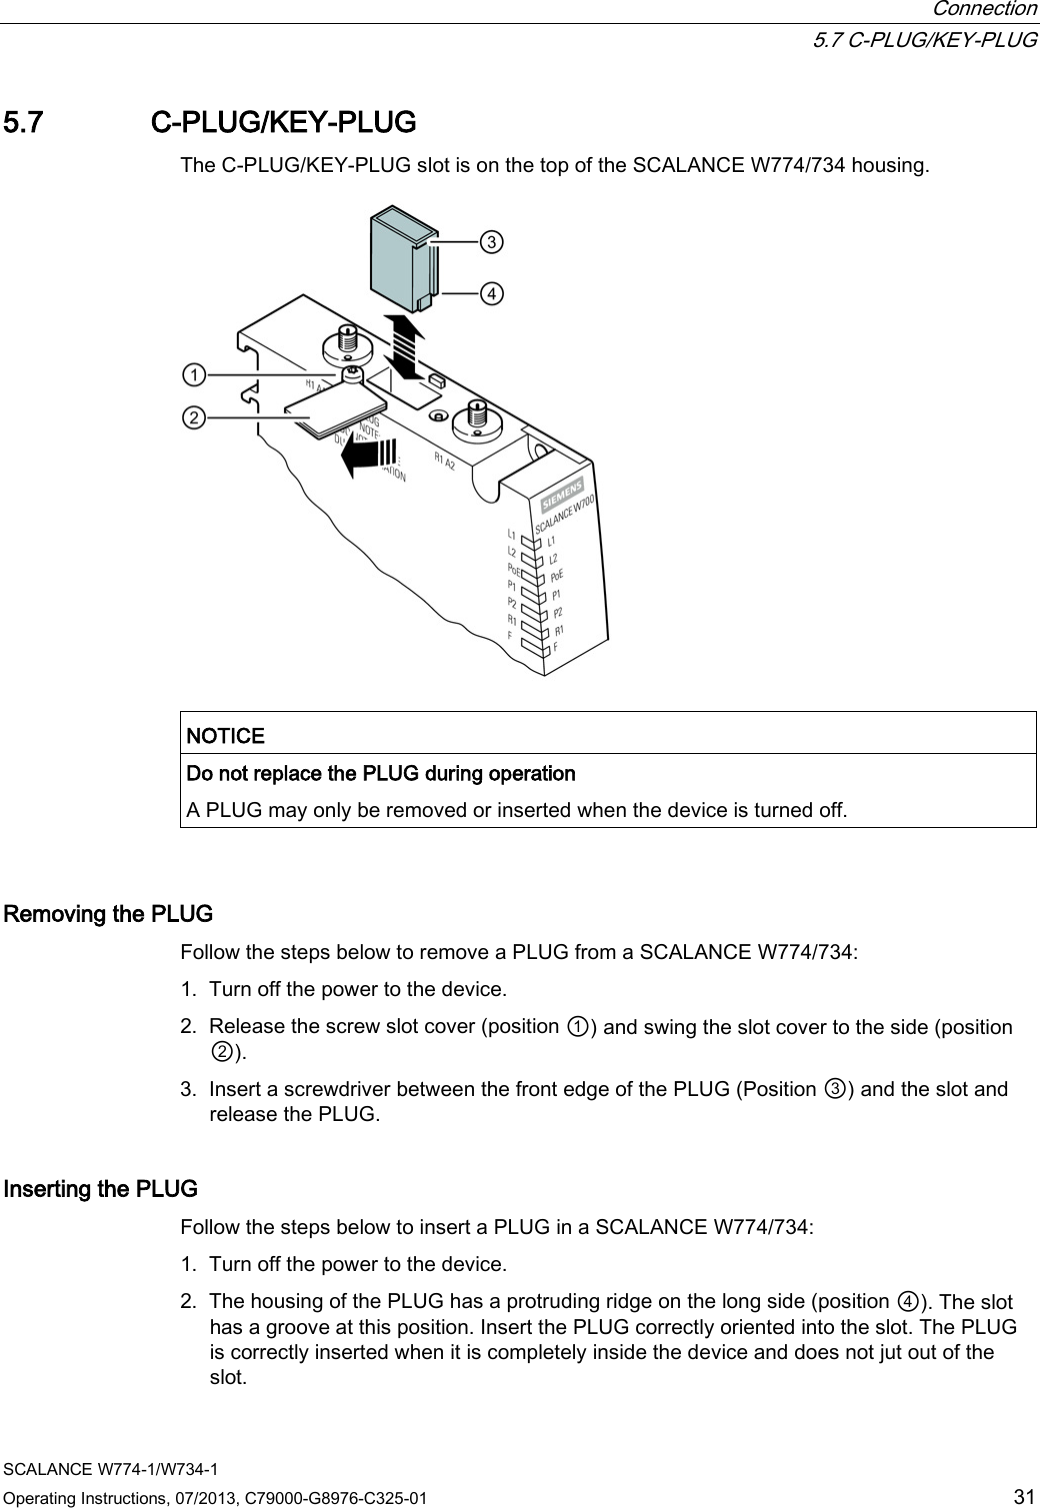  Connection  5.7 C-PLUG/KEY-PLUG SCALANCE W774-1/W734-1 Operating Instructions, 07/2013, C79000-G8976-C325-01 31 5.7 C-PLUG/KEY-PLUG The C-PLUG/KEY-PLUG slot is on the top of the SCALANCE W774/734 housing.    NOTICE Do not replace the PLUG during operation A PLUG may only be removed or inserted when the device is turned off.   Removing the PLUG Follow the steps below to remove a PLUG from a SCALANCE W774/734: 1. Turn off the power to the device. 2. Release the screw slot cover (position ①) and swing the slot cover to the side (position ②). 3. Insert a screwdriver between the front edge of the PLUG (Position ③) and the slot and release the PLUG. Inserting the PLUG Follow the steps below to insert a PLUG in a SCALANCE W774/734: 1. Turn off the power to the device. 2. The housing of the PLUG has a protruding ridge on the long side (position ④). The slot has a groove at this position. Insert the PLUG correctly oriented into the slot. The PLUG is correctly inserted when it is completely inside the device and does not jut out of the slot. 